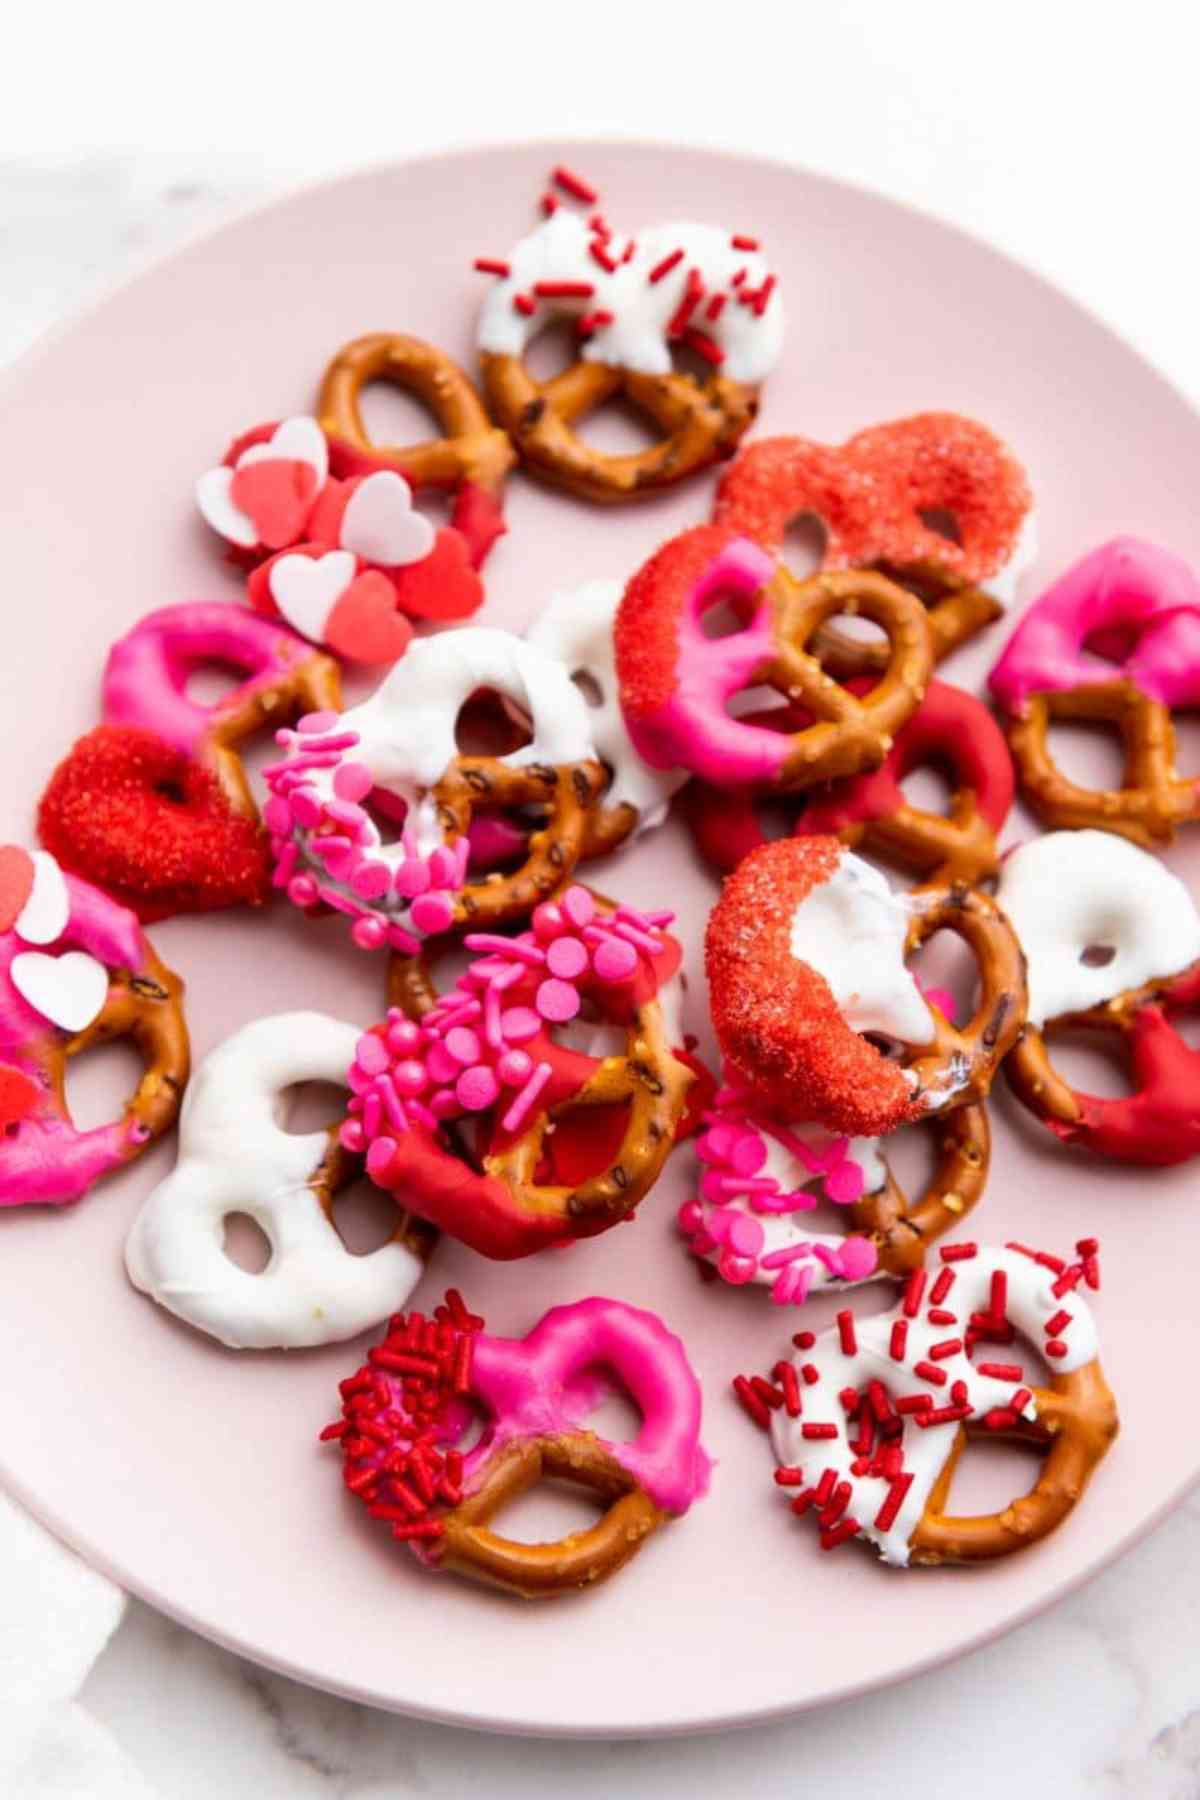 Pile of pretzels on a plate. Pretzels are decorated with pink and white chocolate and sprinkles.